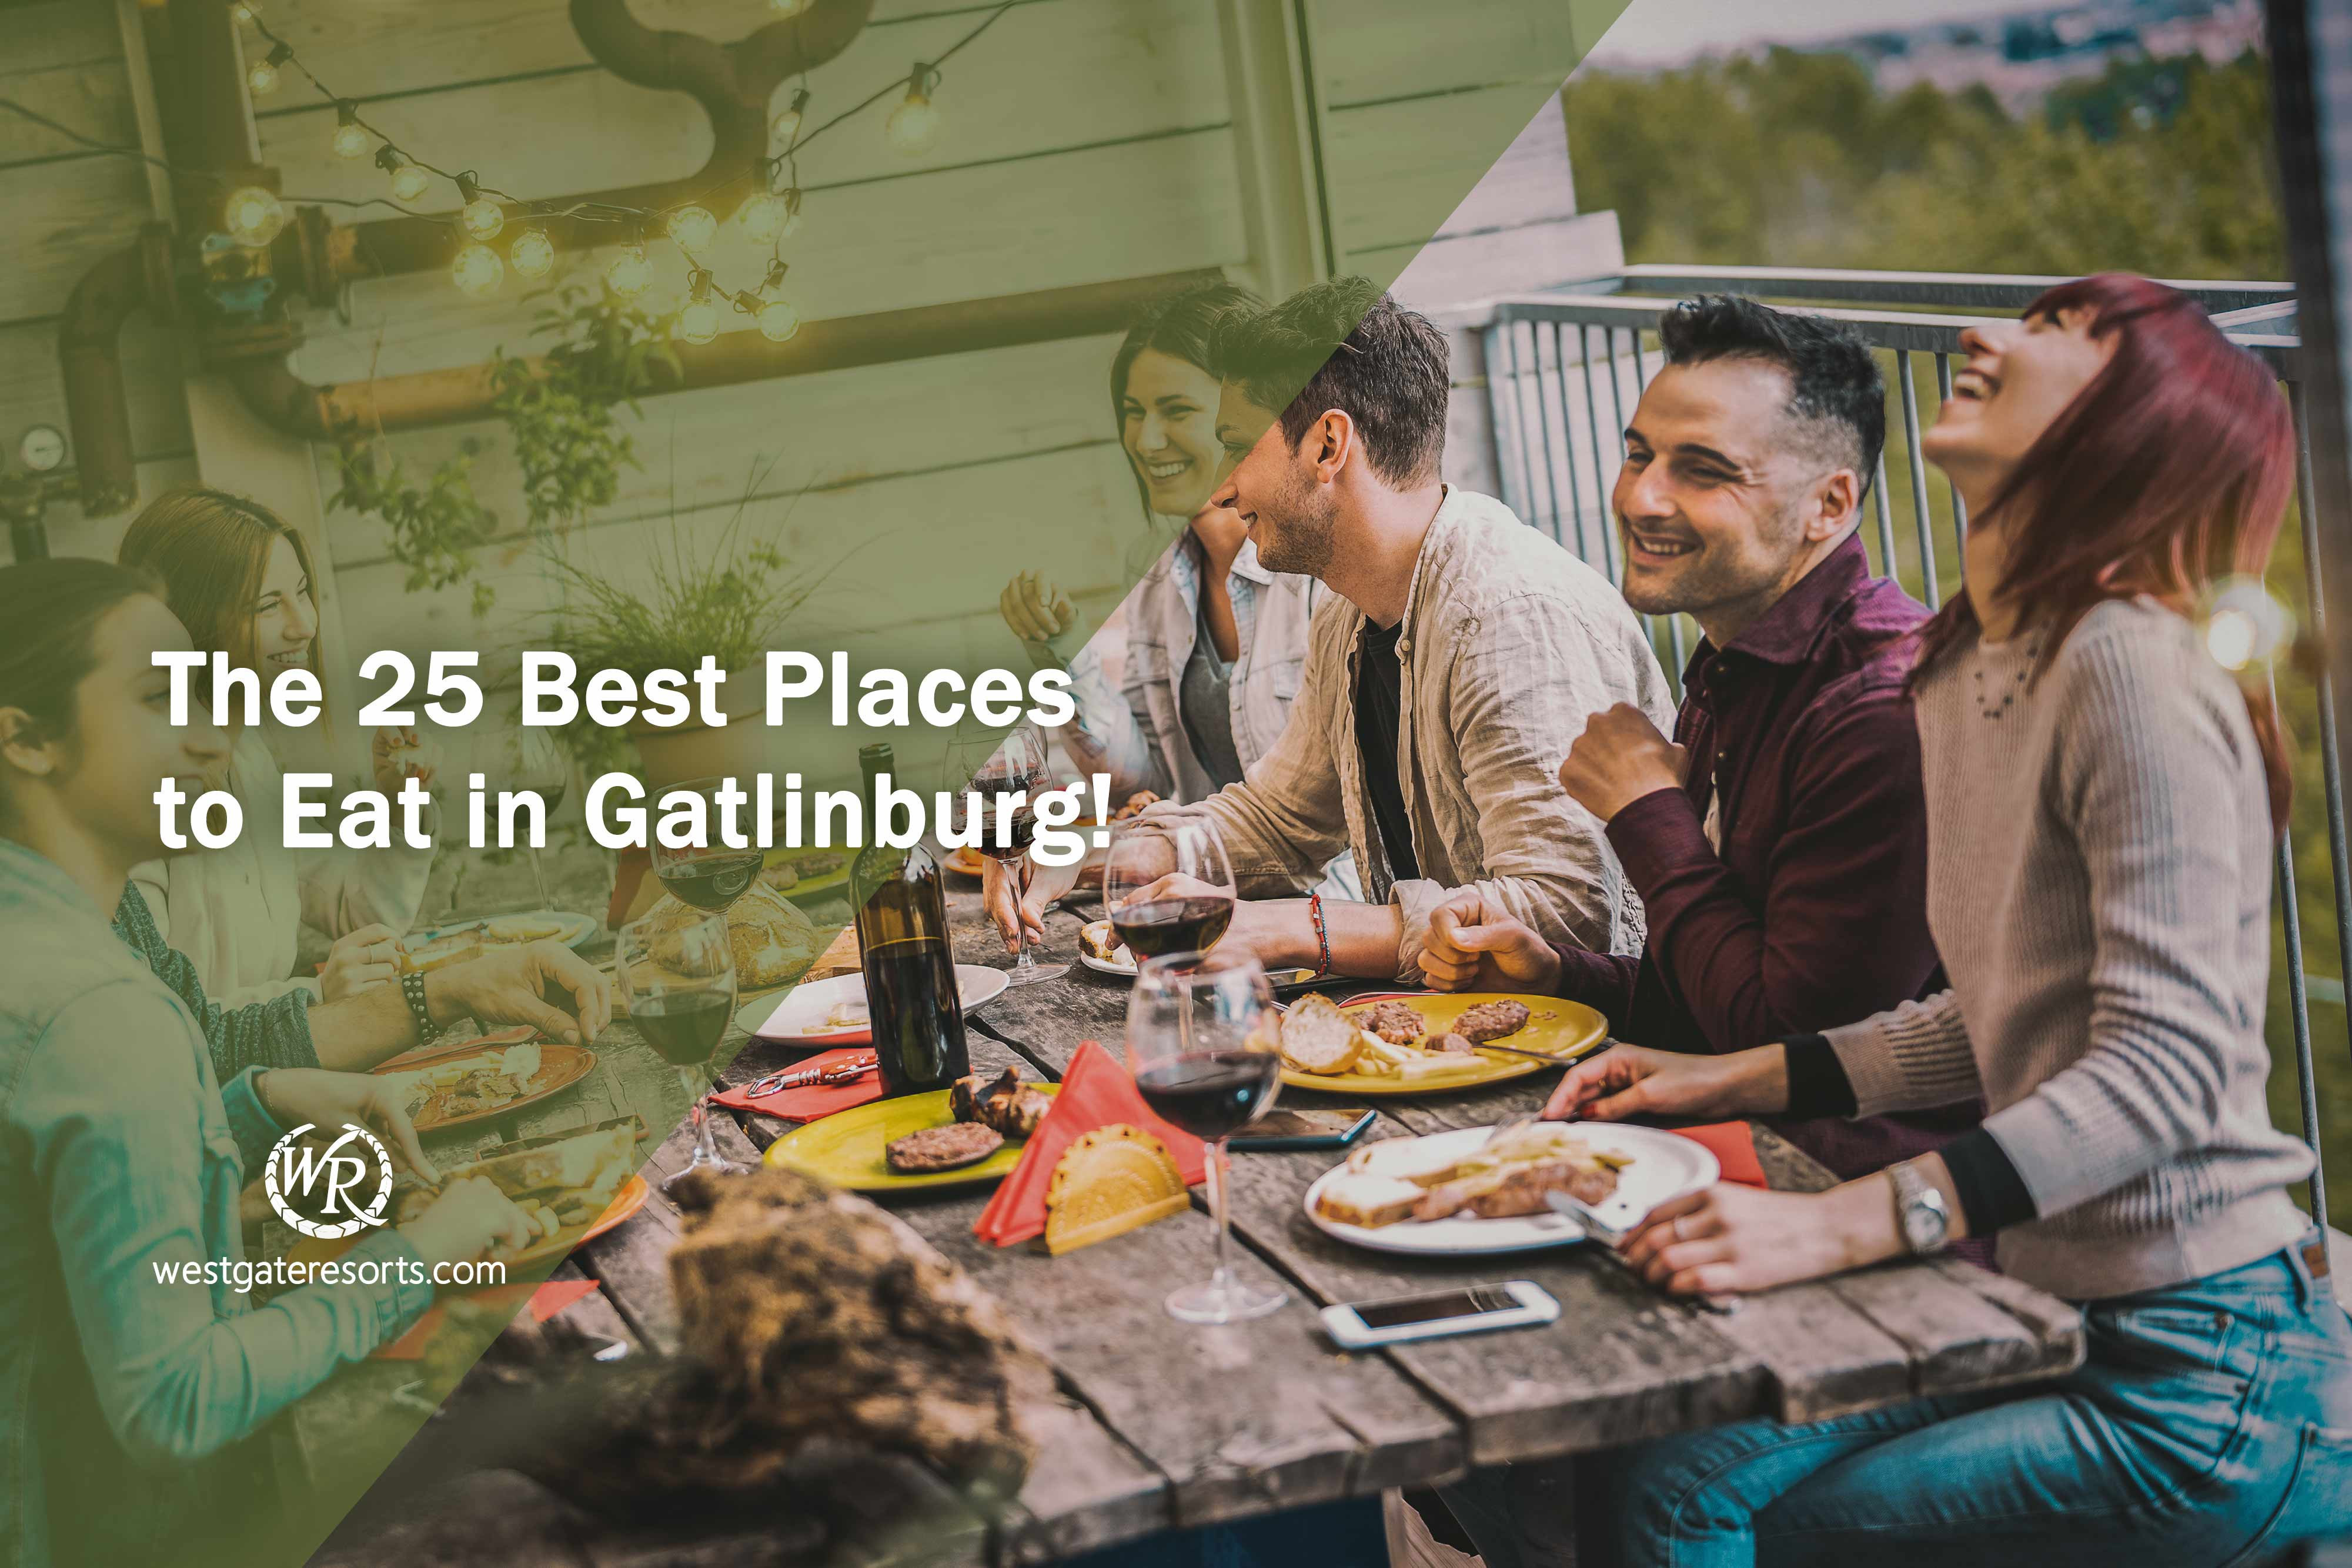 The 25 Best Places to Eat in Gatlinburg!